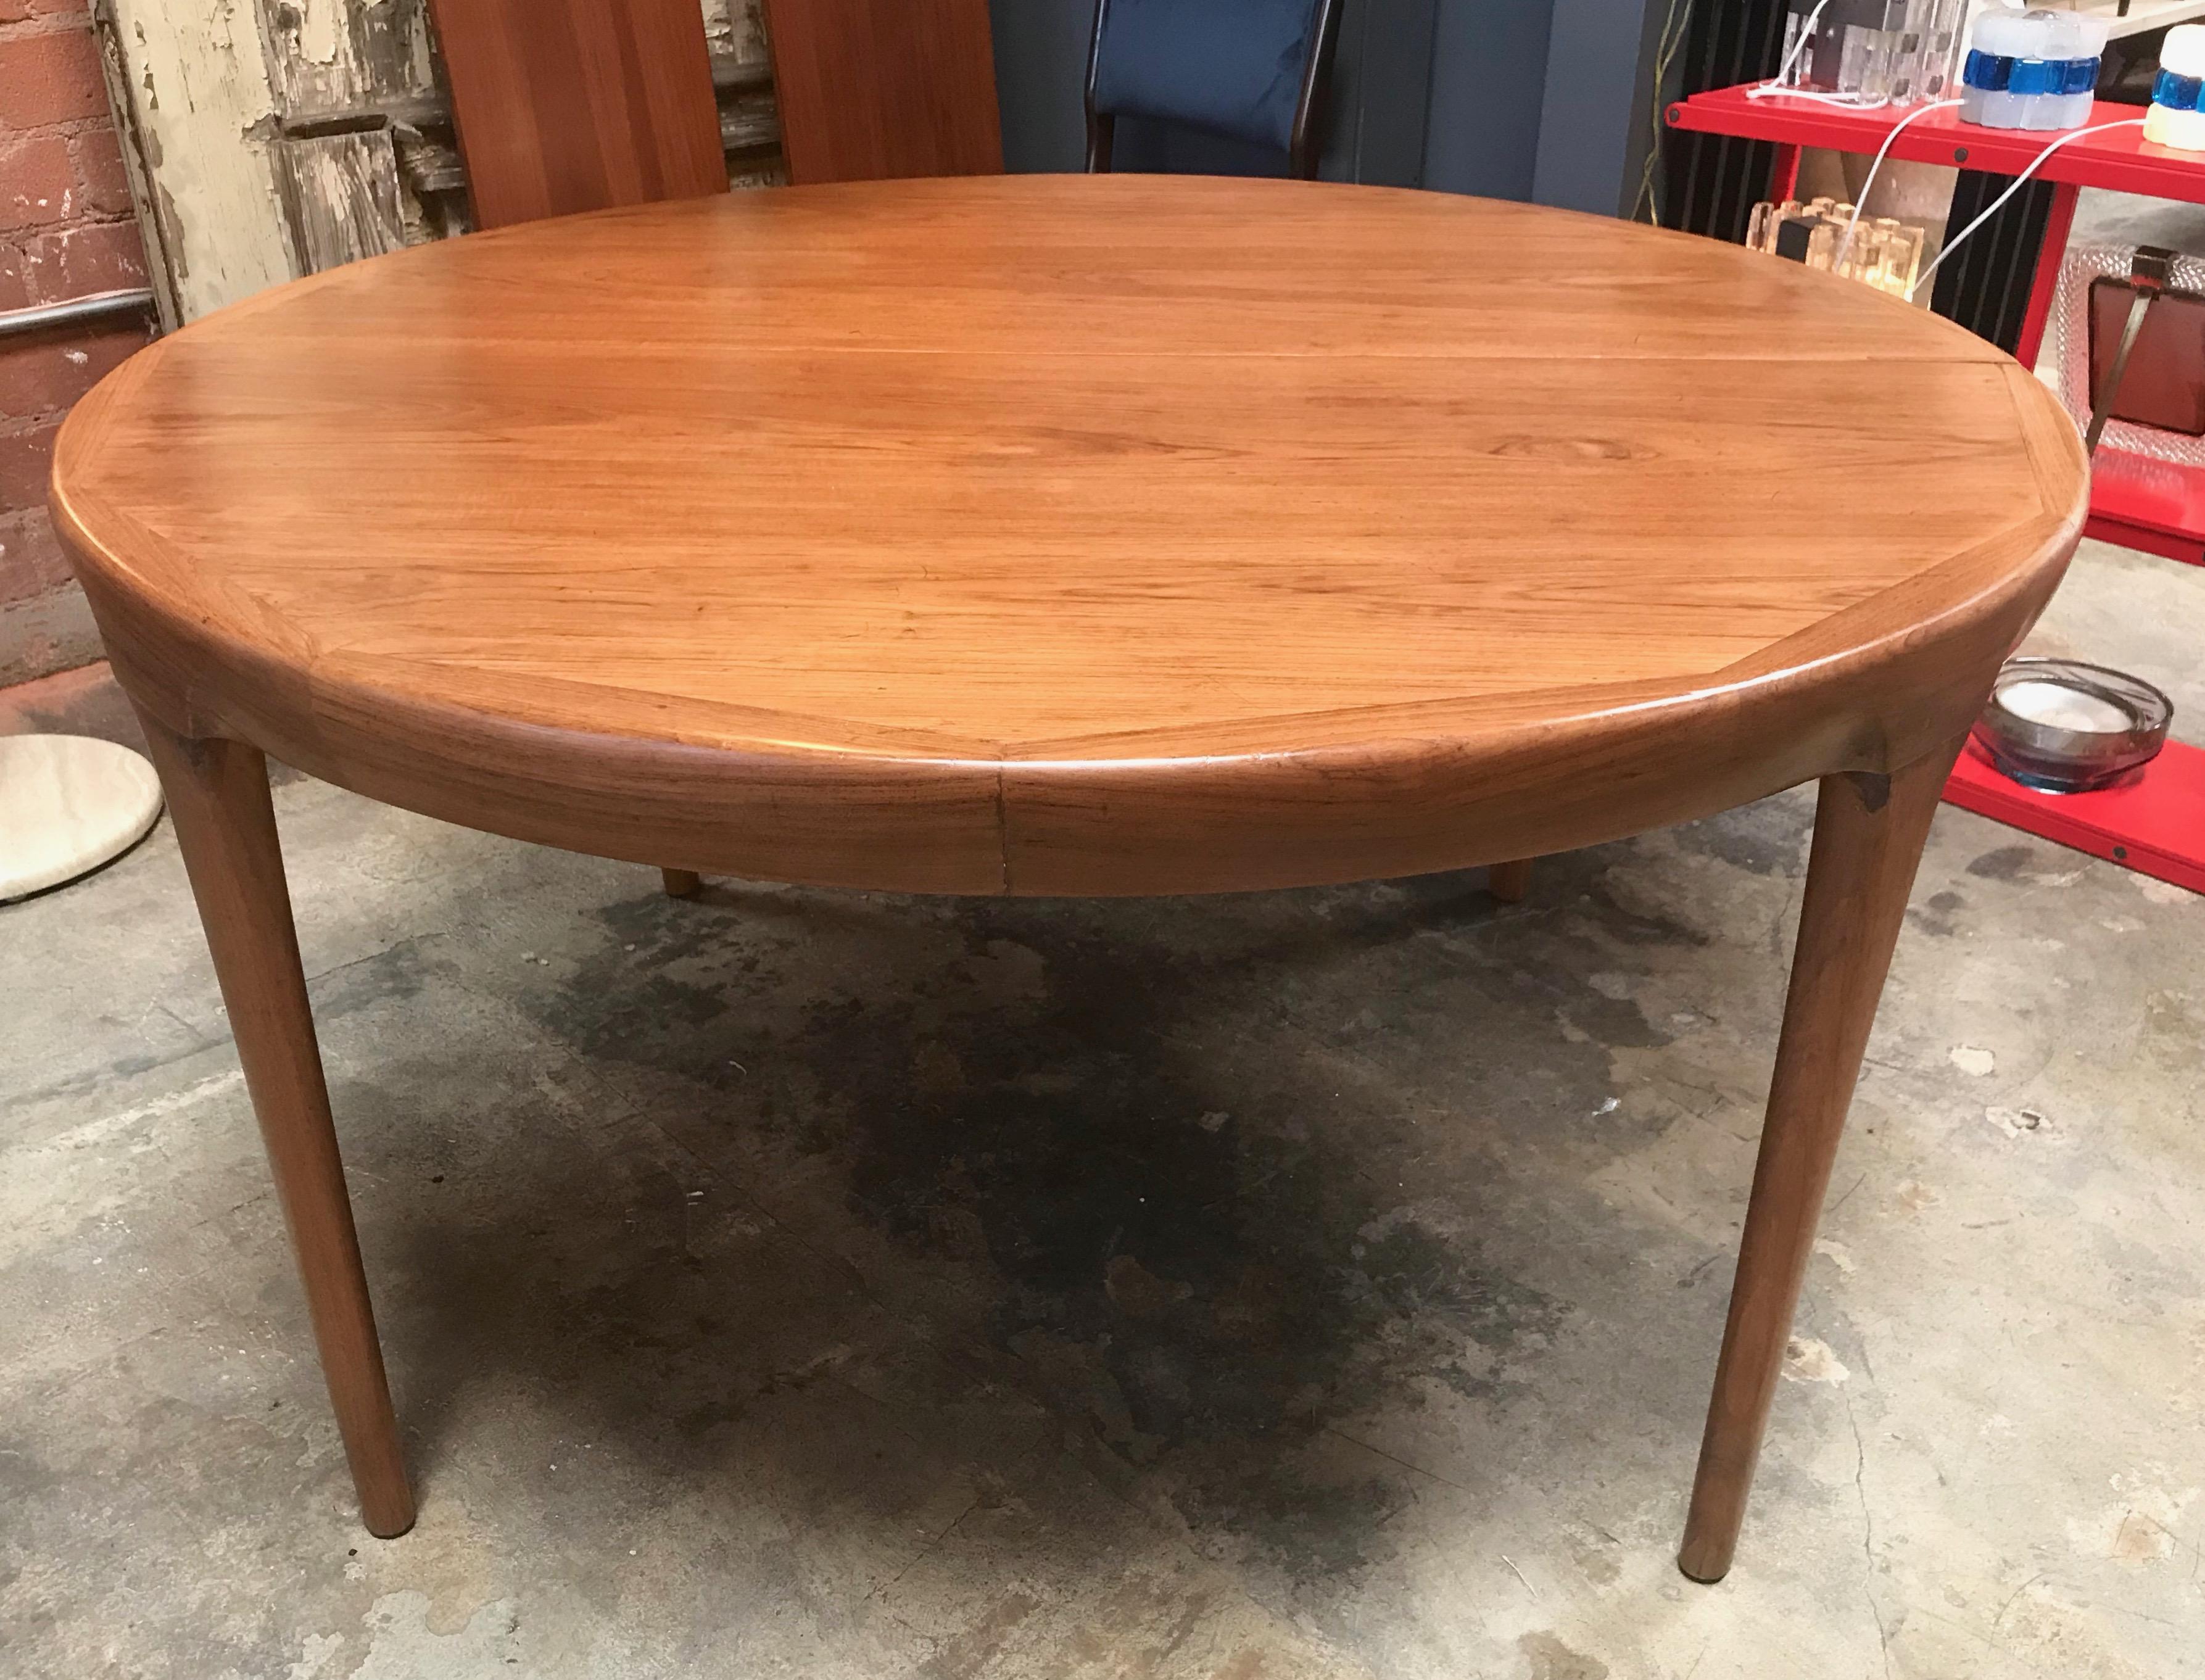 Rare Erik Worts for Worts Mobler teak dining table with two leafs.
Table is in great vintage condition, with minor wear. 
Original finish, recently oiled. 
Dimensions:
(1 leaf) 15 3/4